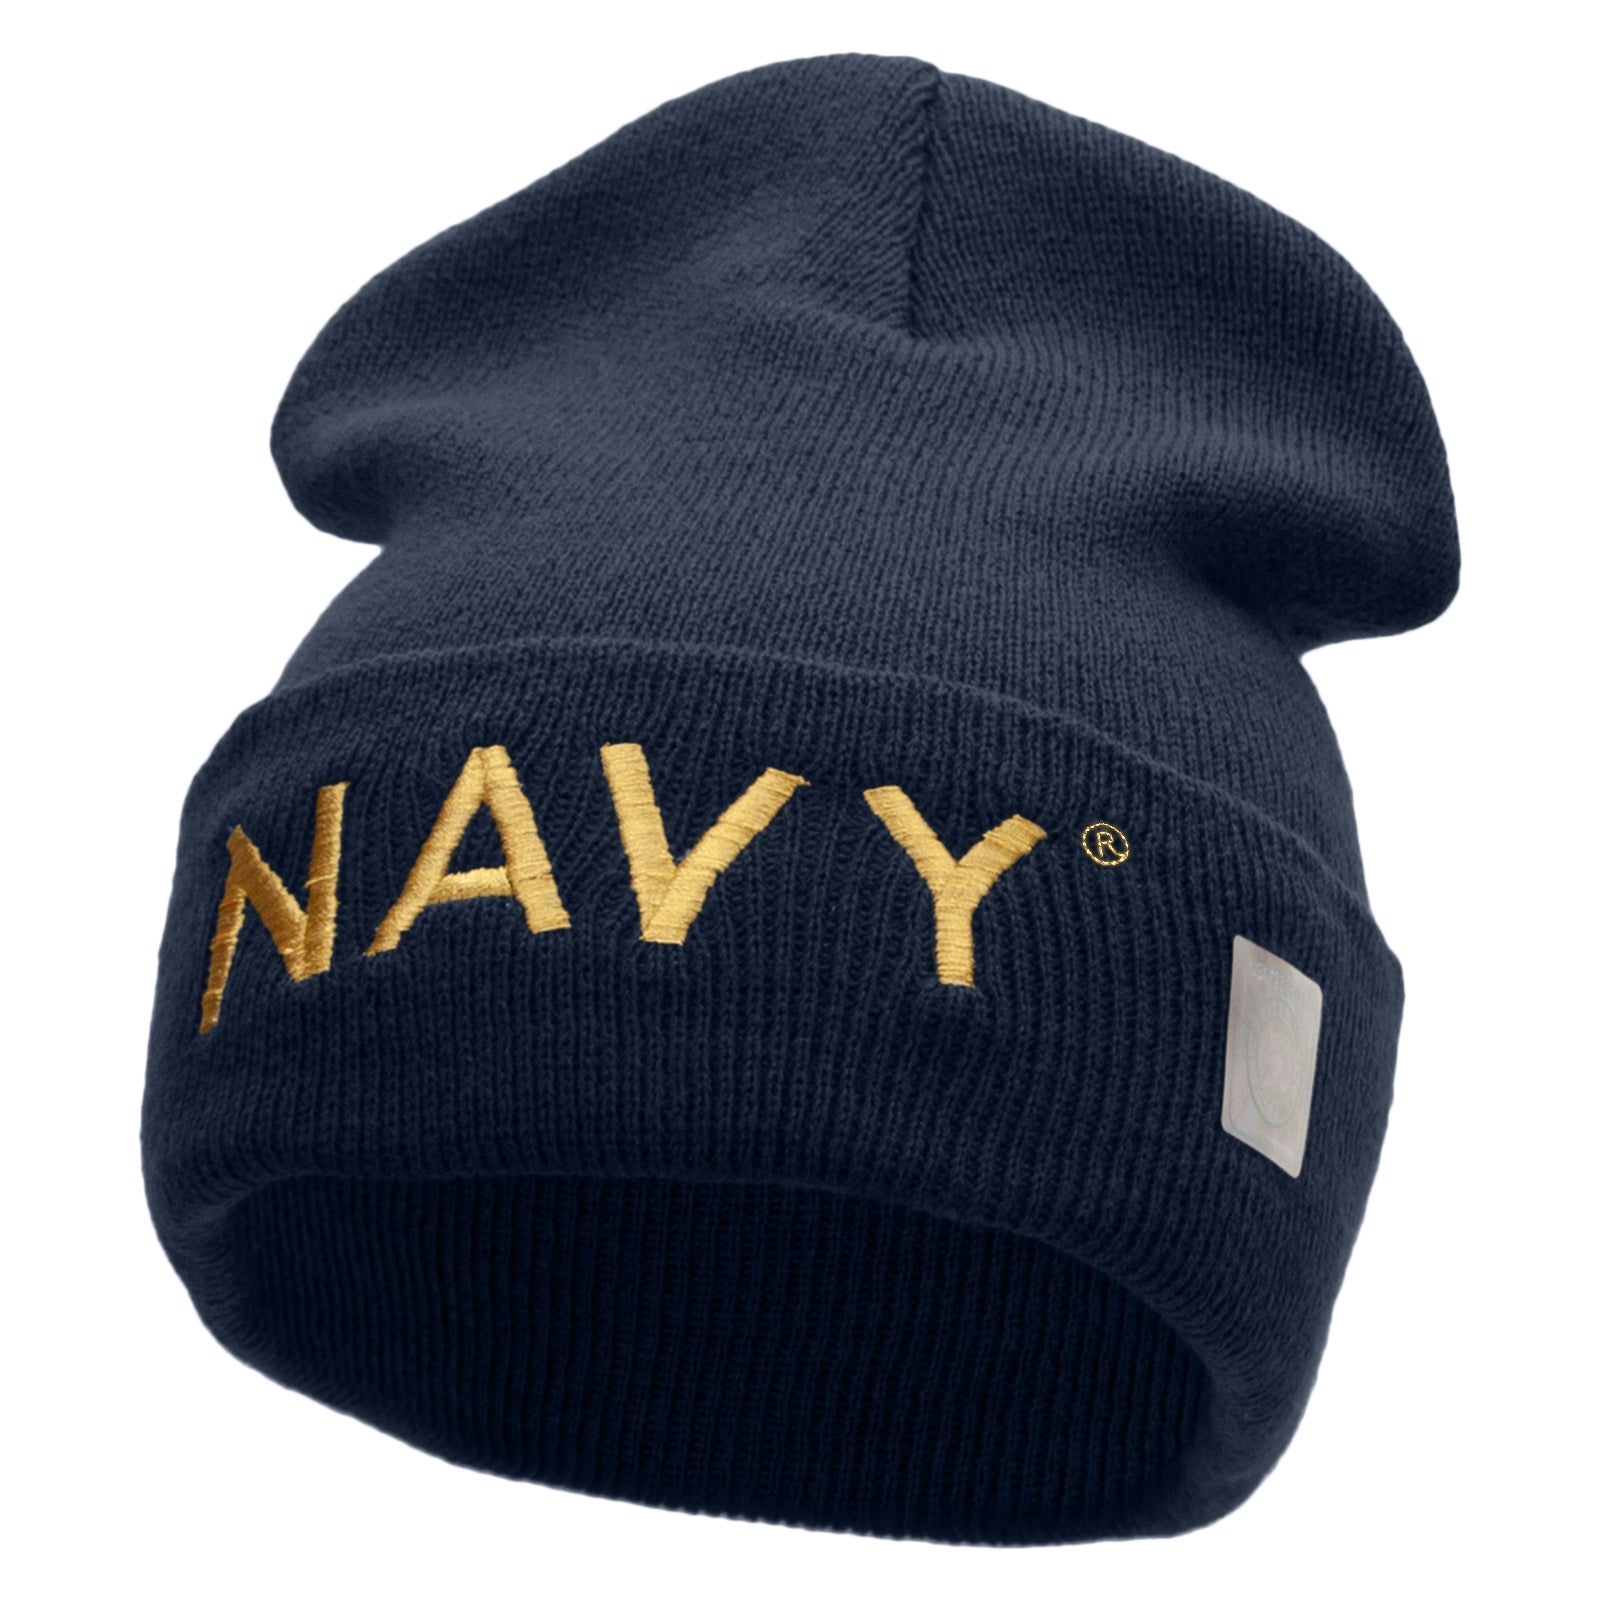 Licensed Navy Word Embroidered Long Beanie Made in USA - Navy OSFM